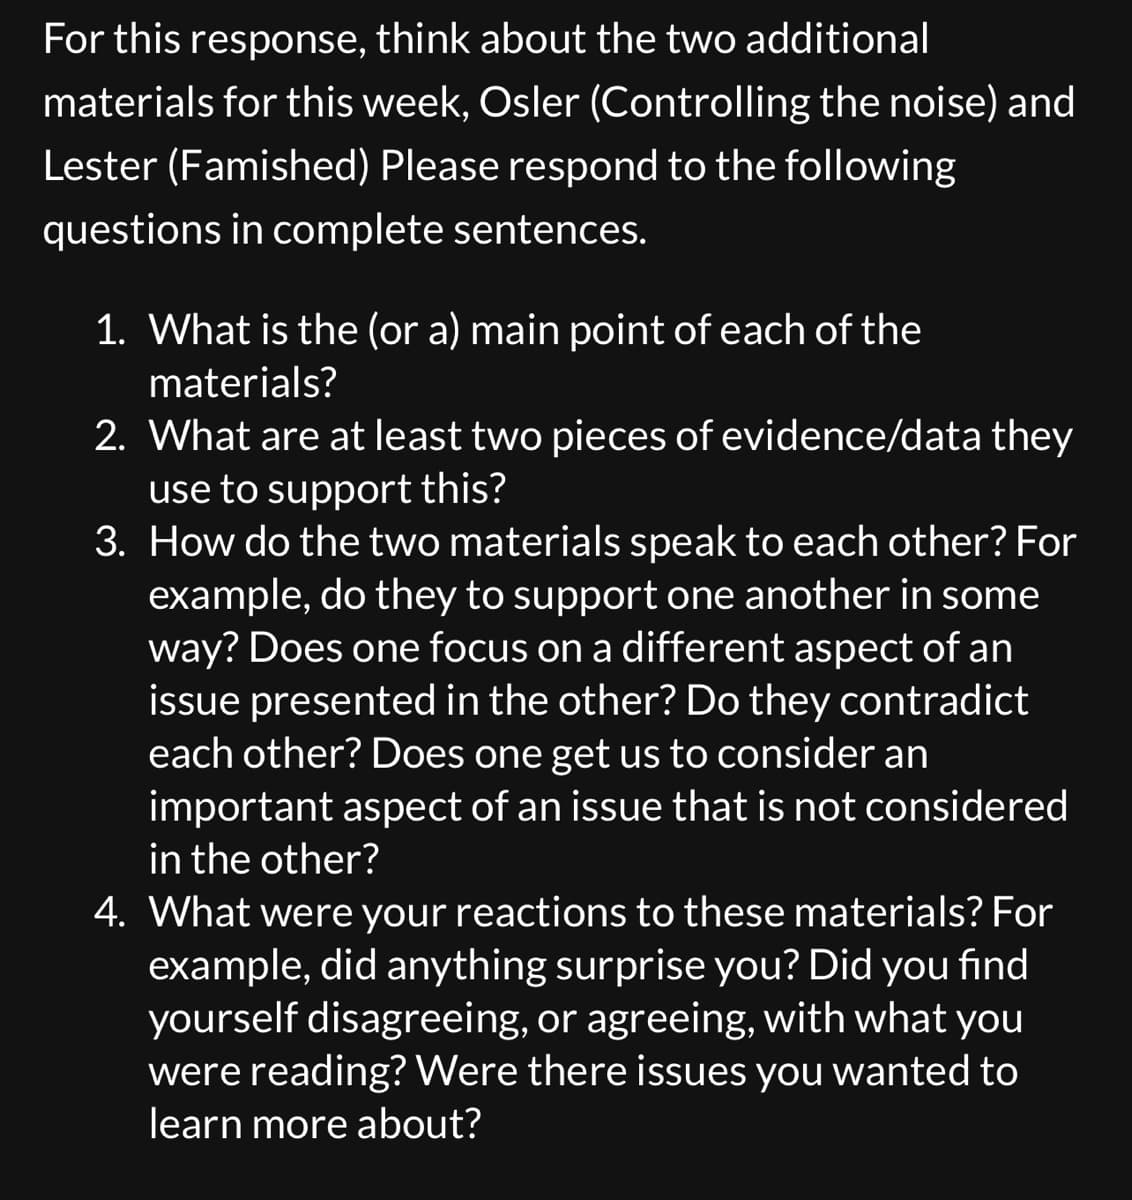 For this response, think about the two additional
materials for this week, Osler (Controlling the noise) and
Lester (Famished) Please respond to the following
questions in complete sentences.
1. What is the (or a) main point of each of the
materials?
2. What are at least two pieces of evidence/data they
use to support this?
3. How do the two materials speak to each other? For
example, do they to support one another in some
way? Does one focus on a different aspect of an
issue presented in the other? Do they contradict
each other? Does one get us to consider an
important aspect of an issue that is not considered
in the other?
4. What were your reactions to these materials? For
example, did anything surprise you? Did you find
yourself disagreeing, or agreeing, with what you
were reading? Were there issues you wanted to
learn more about?